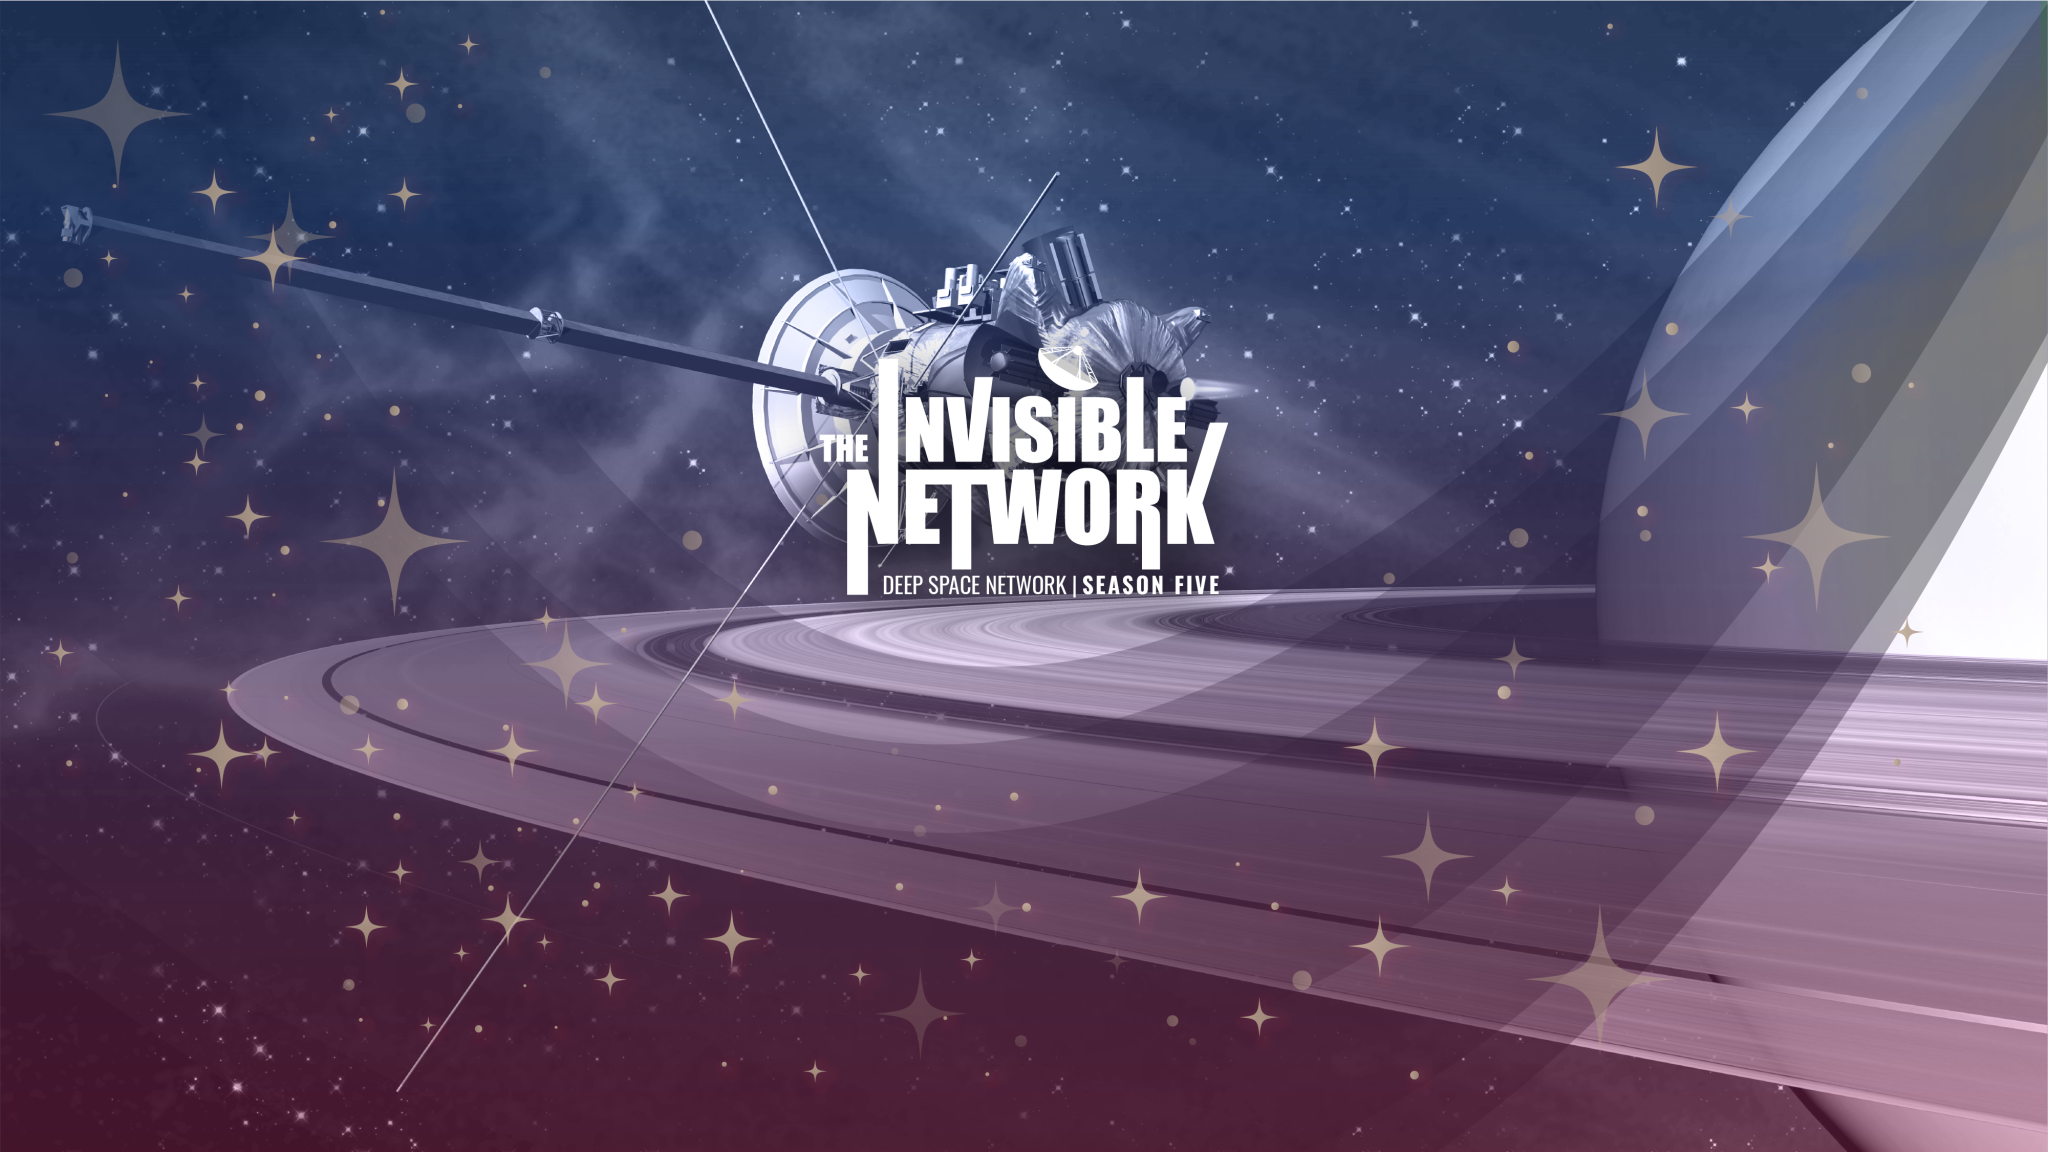 Artists Conception of Cassini Saturn orbit insertion overlaid with elements from The Invisible Network podcast promotional graphics.